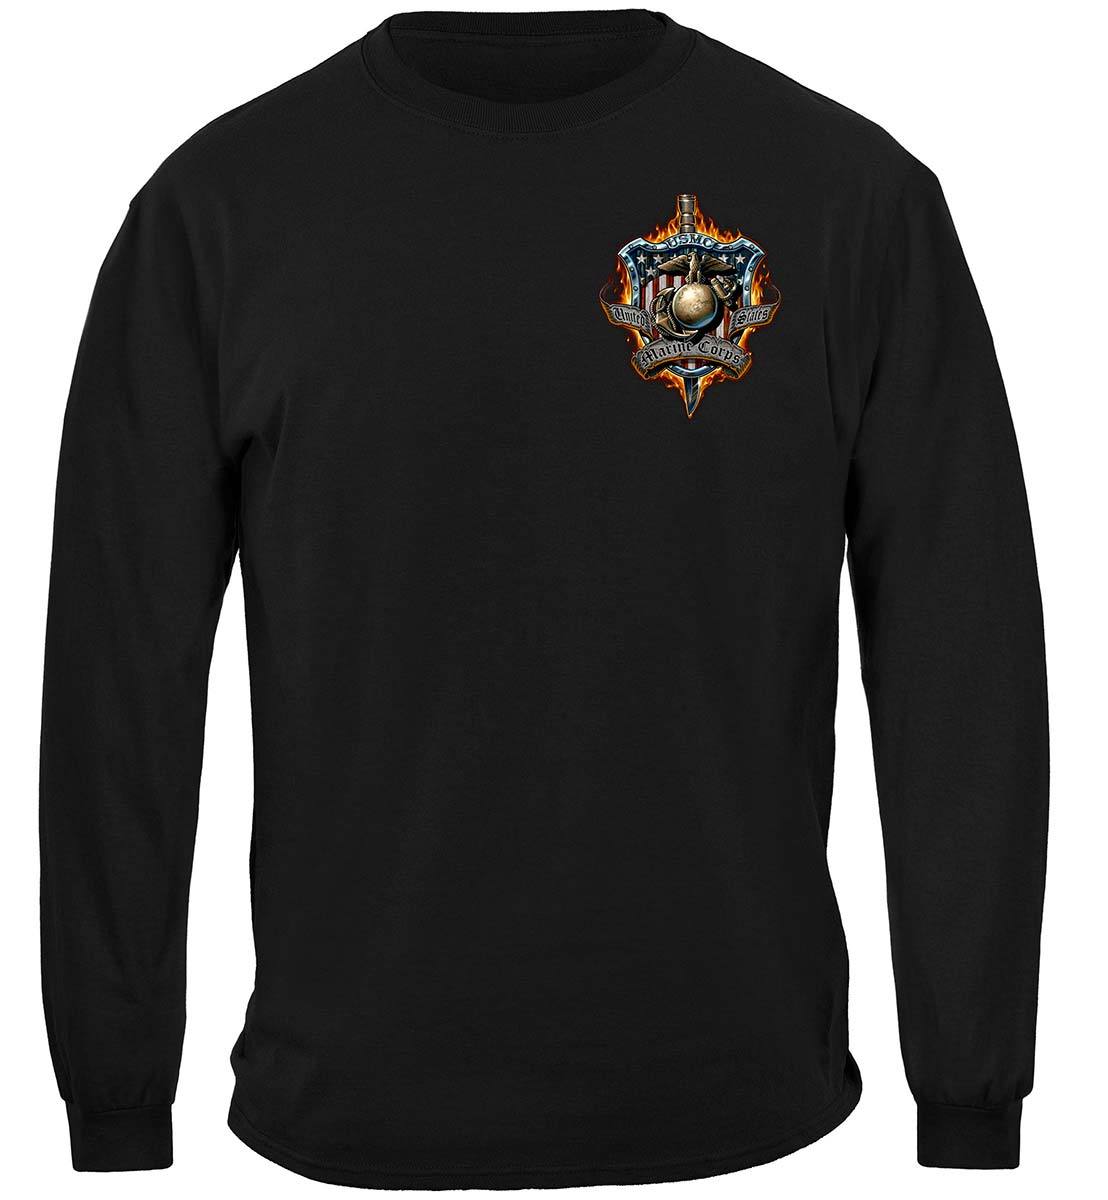 Once And Always A Marine Premium Hooded Sweat Shirt